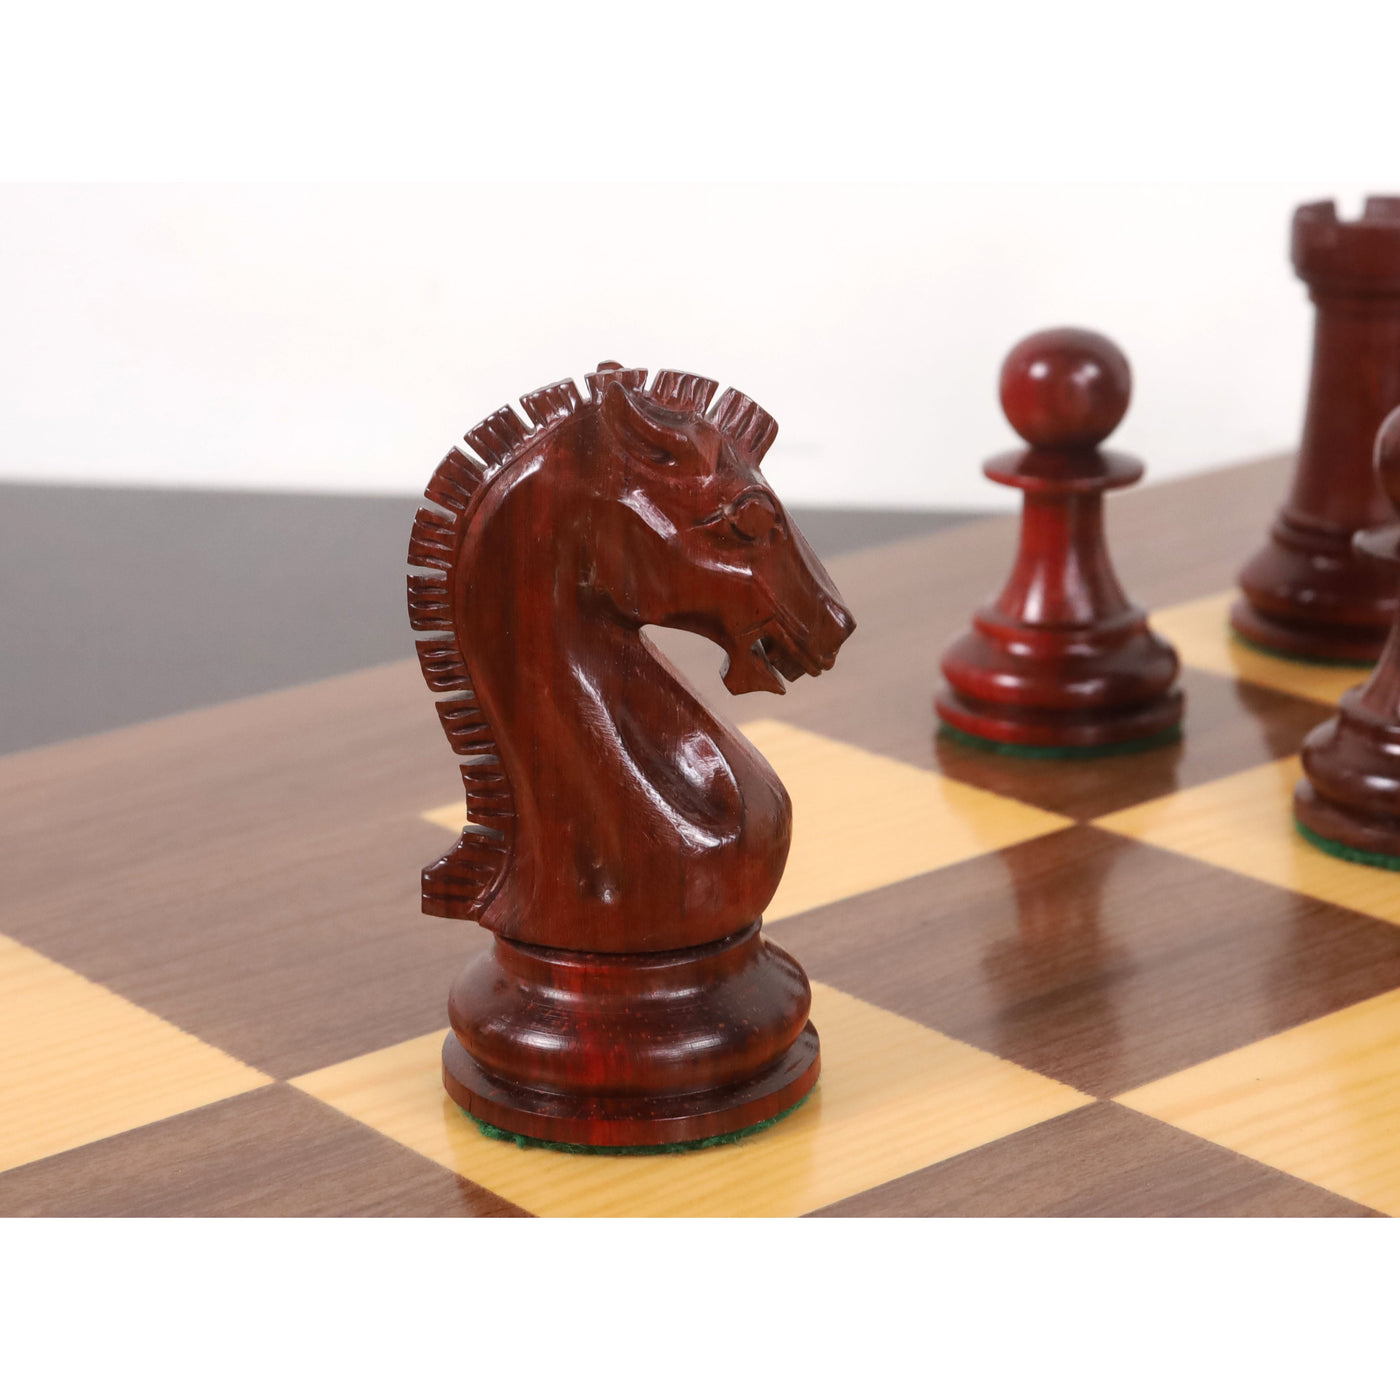 2021 Sinquefield Cup Reproduced Staunton Chess Set - Chess Pieces Only - Triple weighted Bud Rose Wood